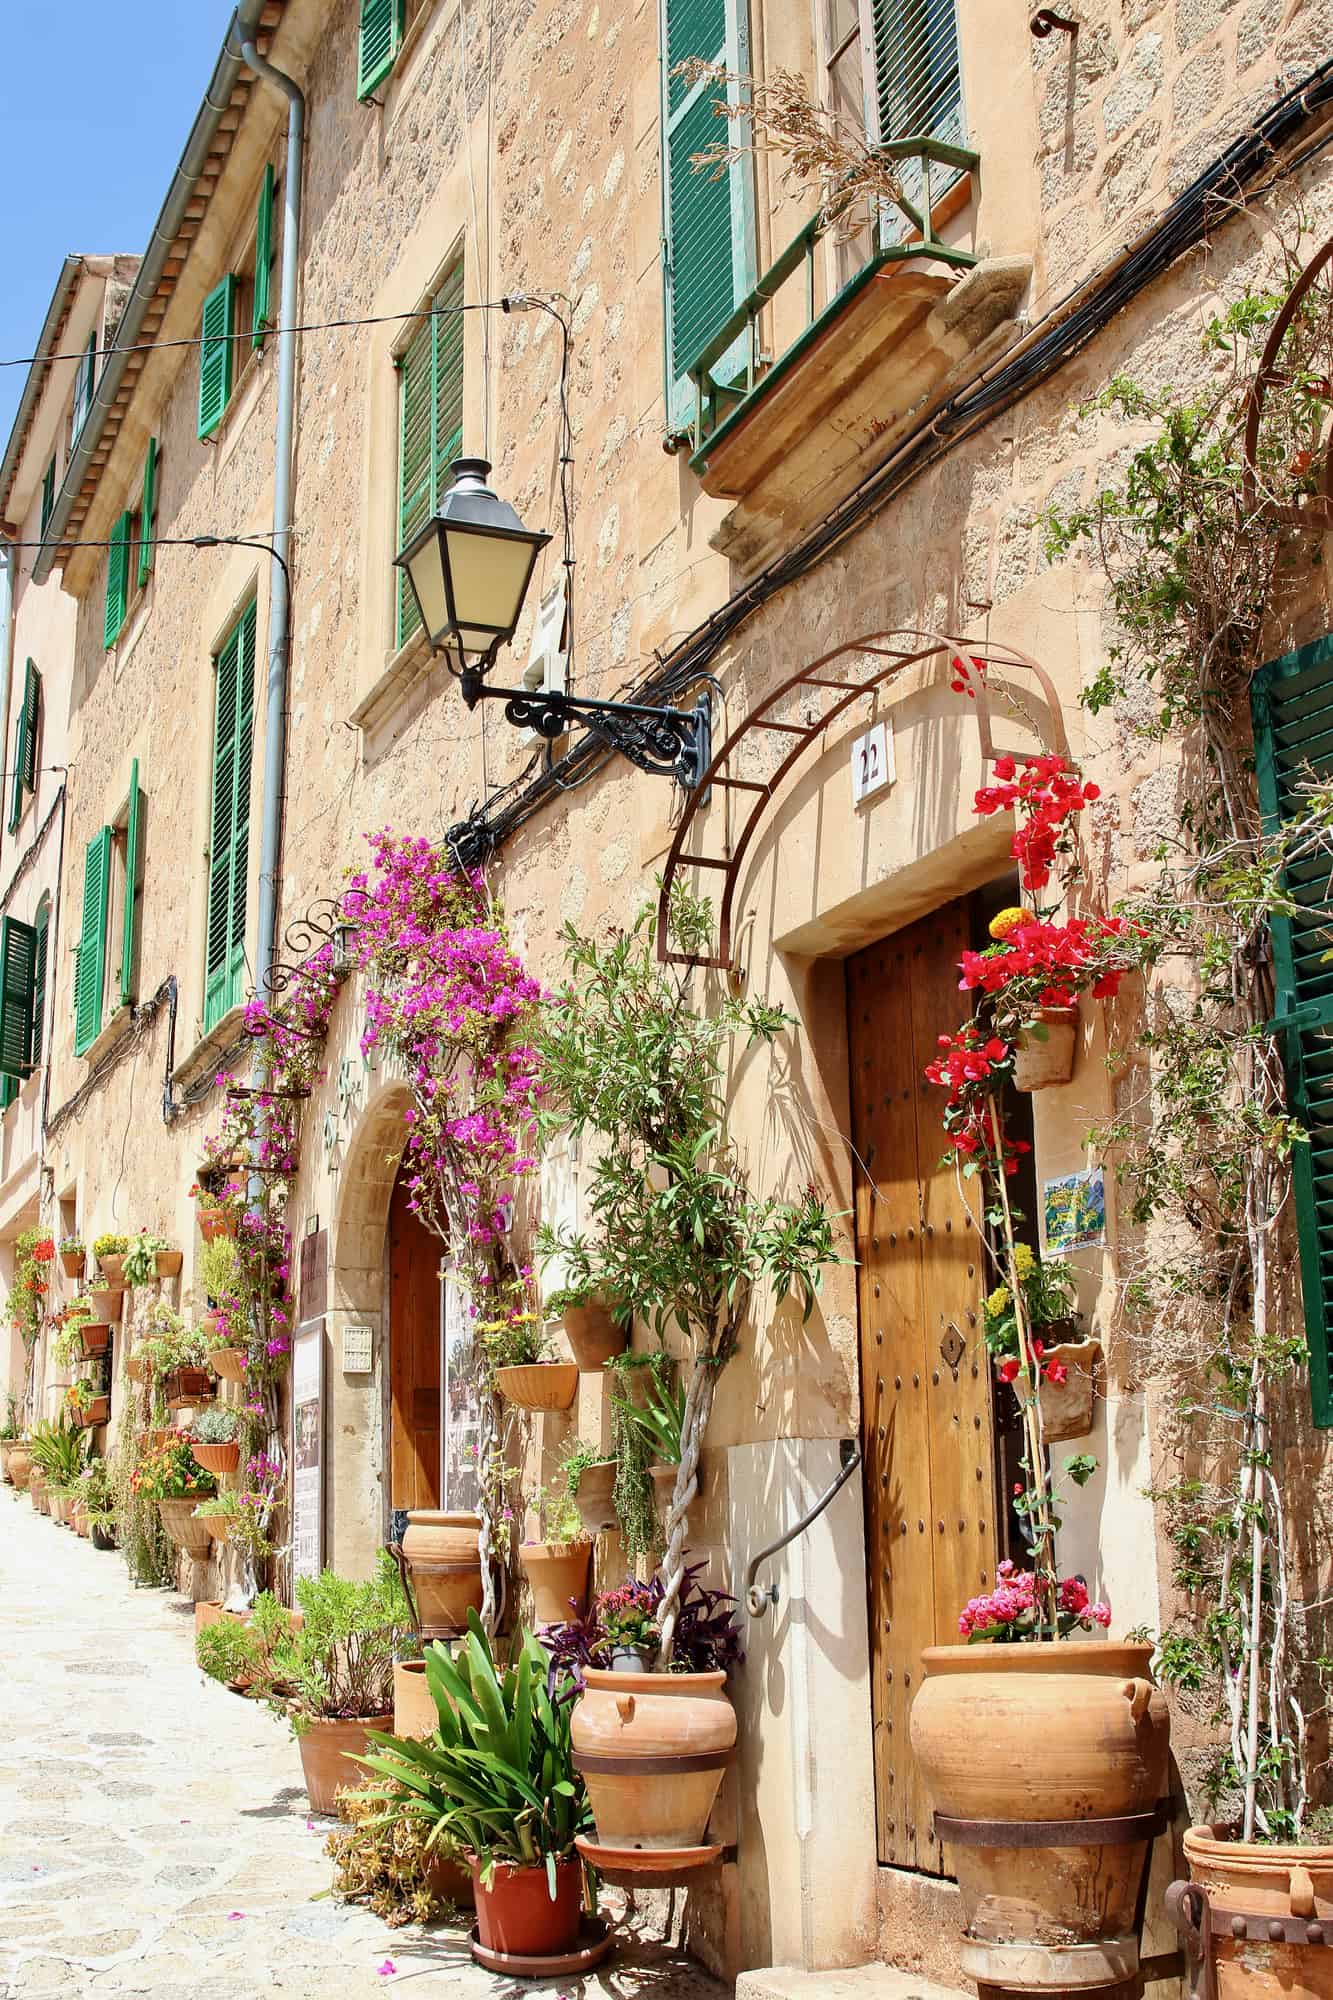 View of idyllic Valldemosa village old houses decorated with seasonal plants and flowers, Mallorca, Balearic Islands, Spain